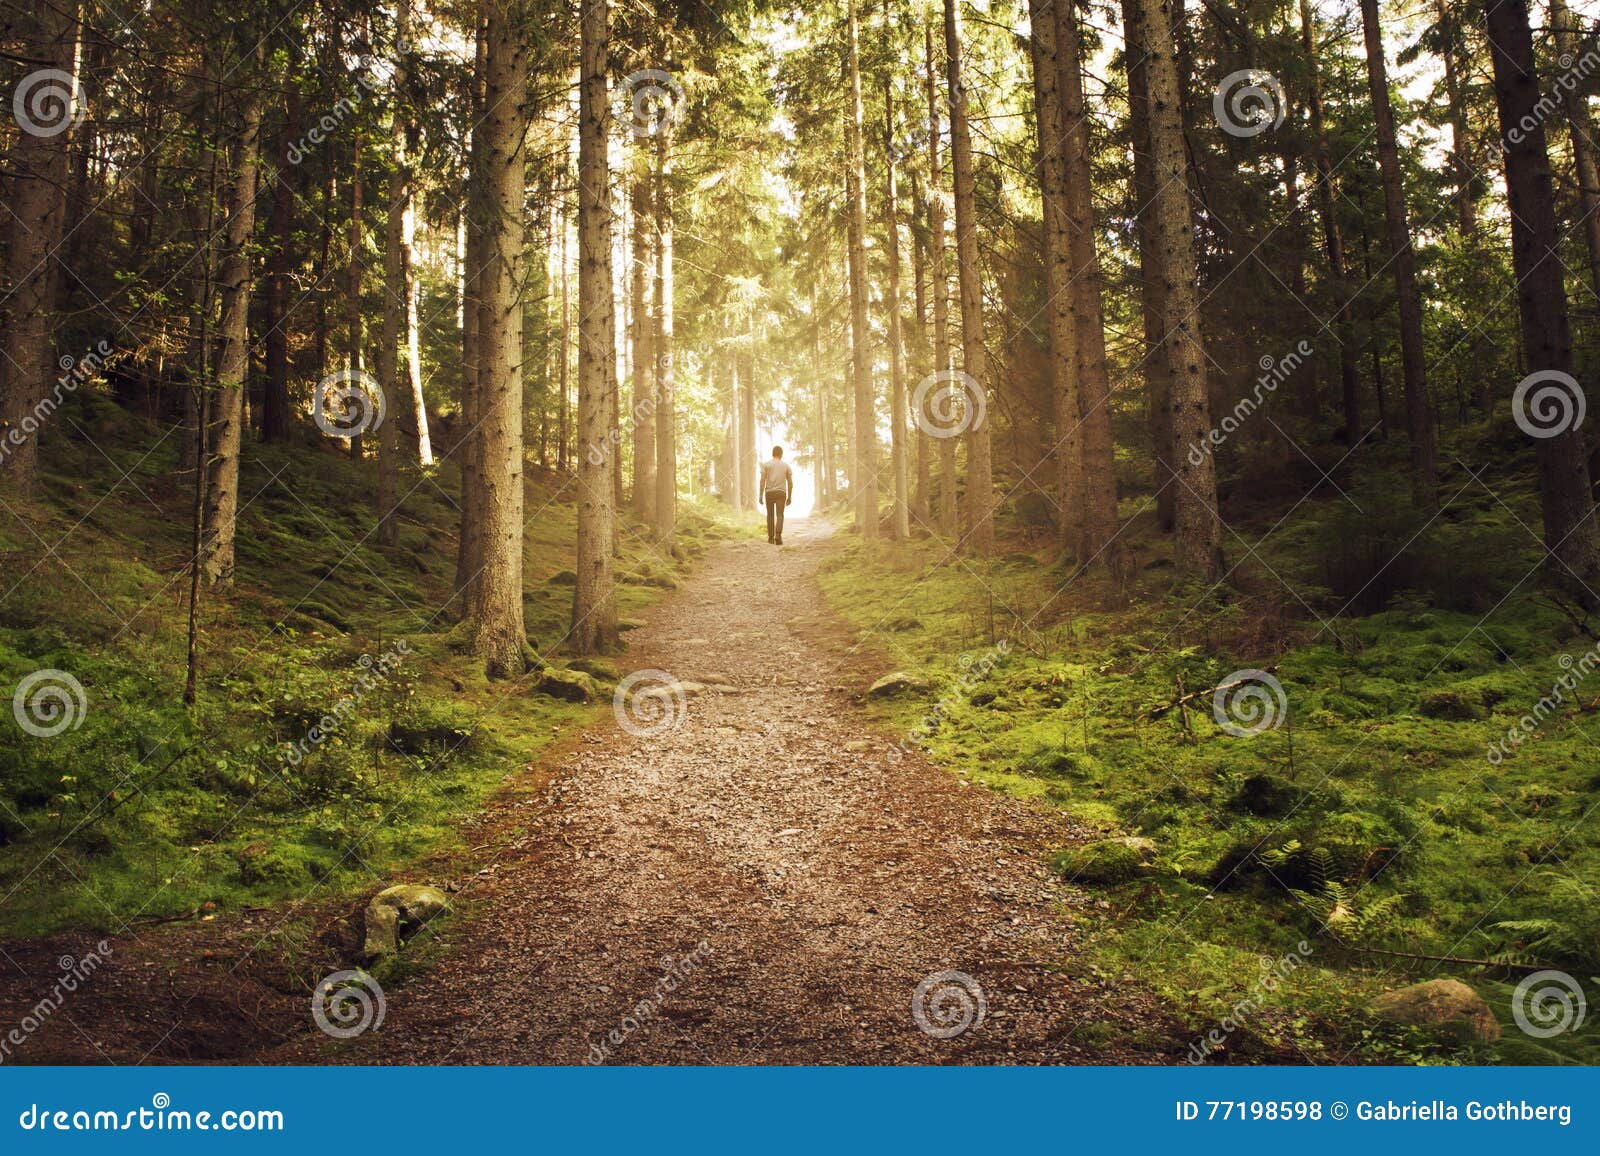 man walking up path towards the light in magic forest.